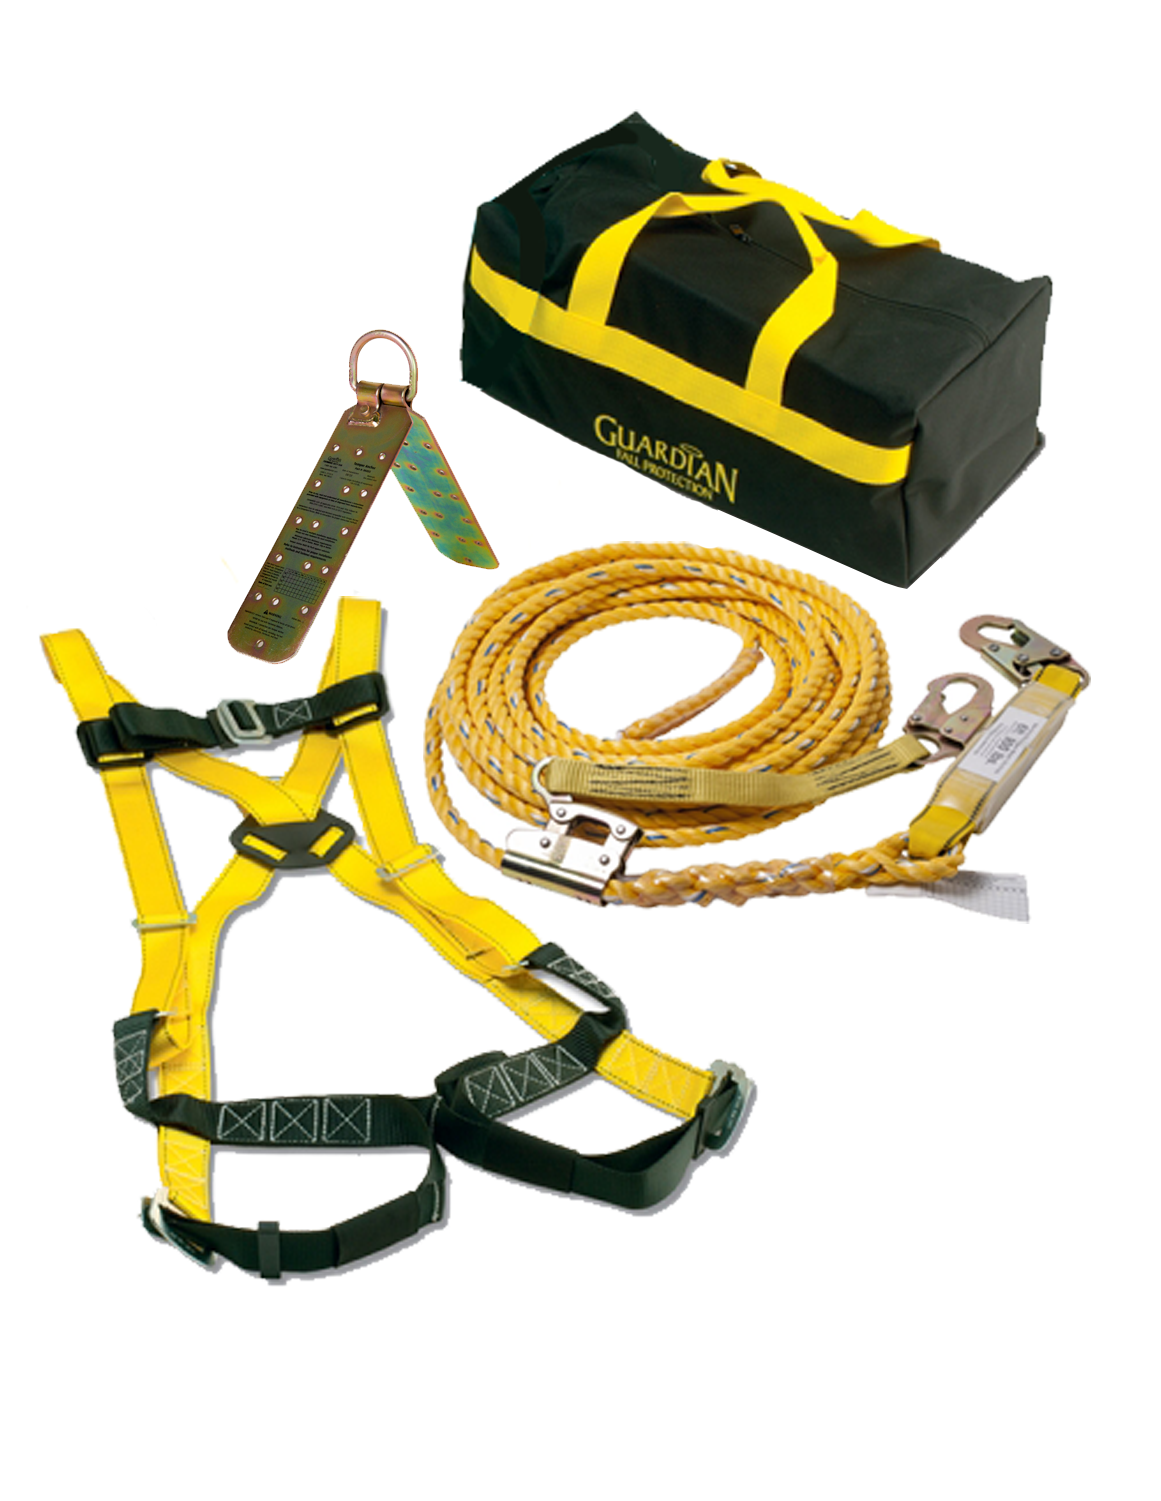 Guardian Fall Protection 00735 SOS-T50 Sack of Safety Bag with Temper Anchor, 50-Foot Vertical Lifeline Assembly and HUV